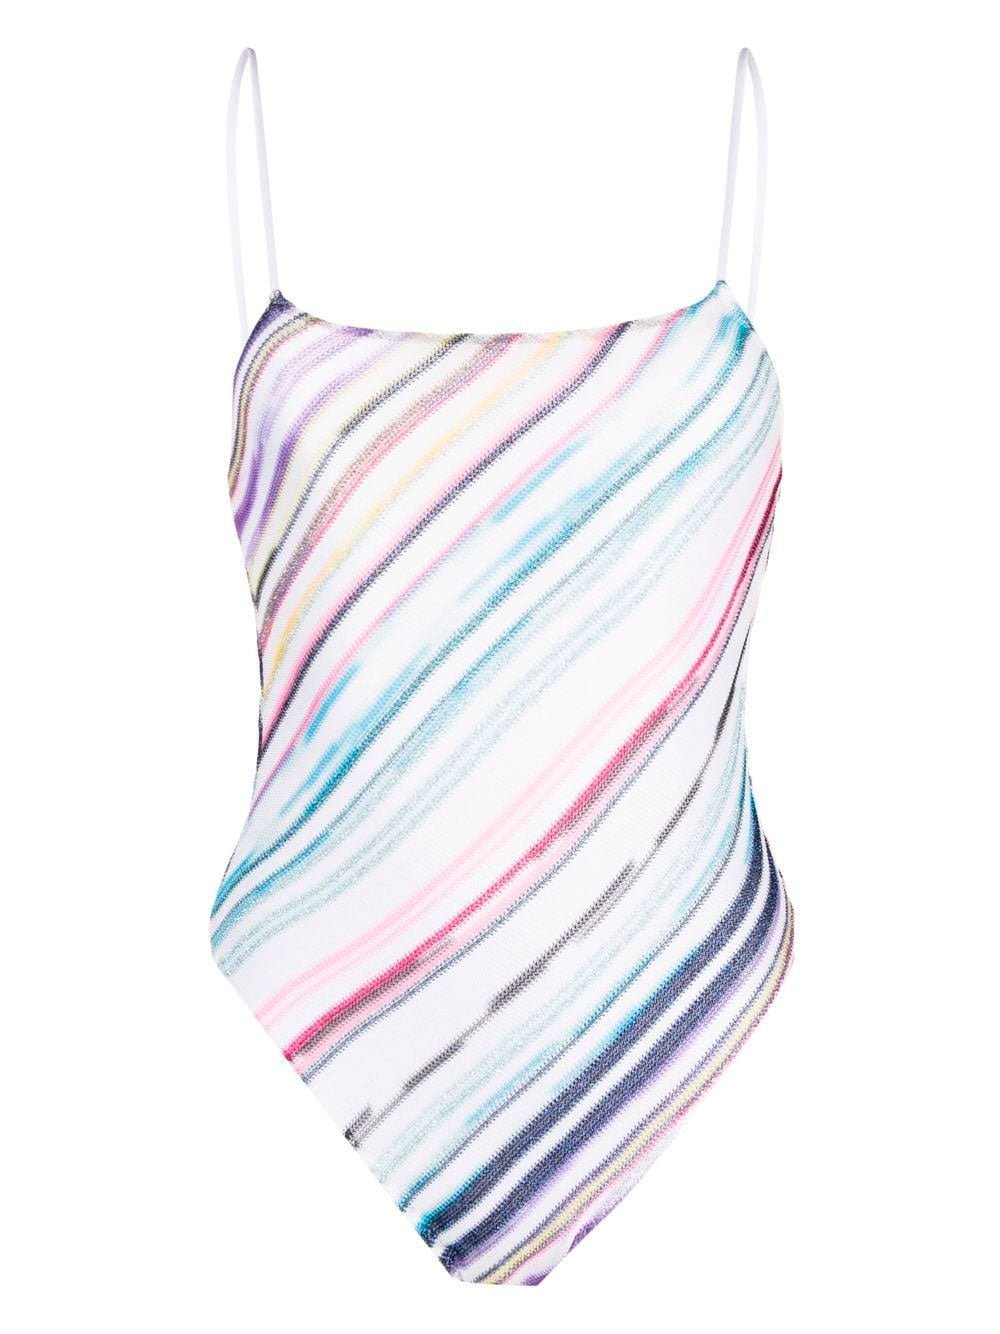 MissoniStripes swimsuit at Fashion Clinic